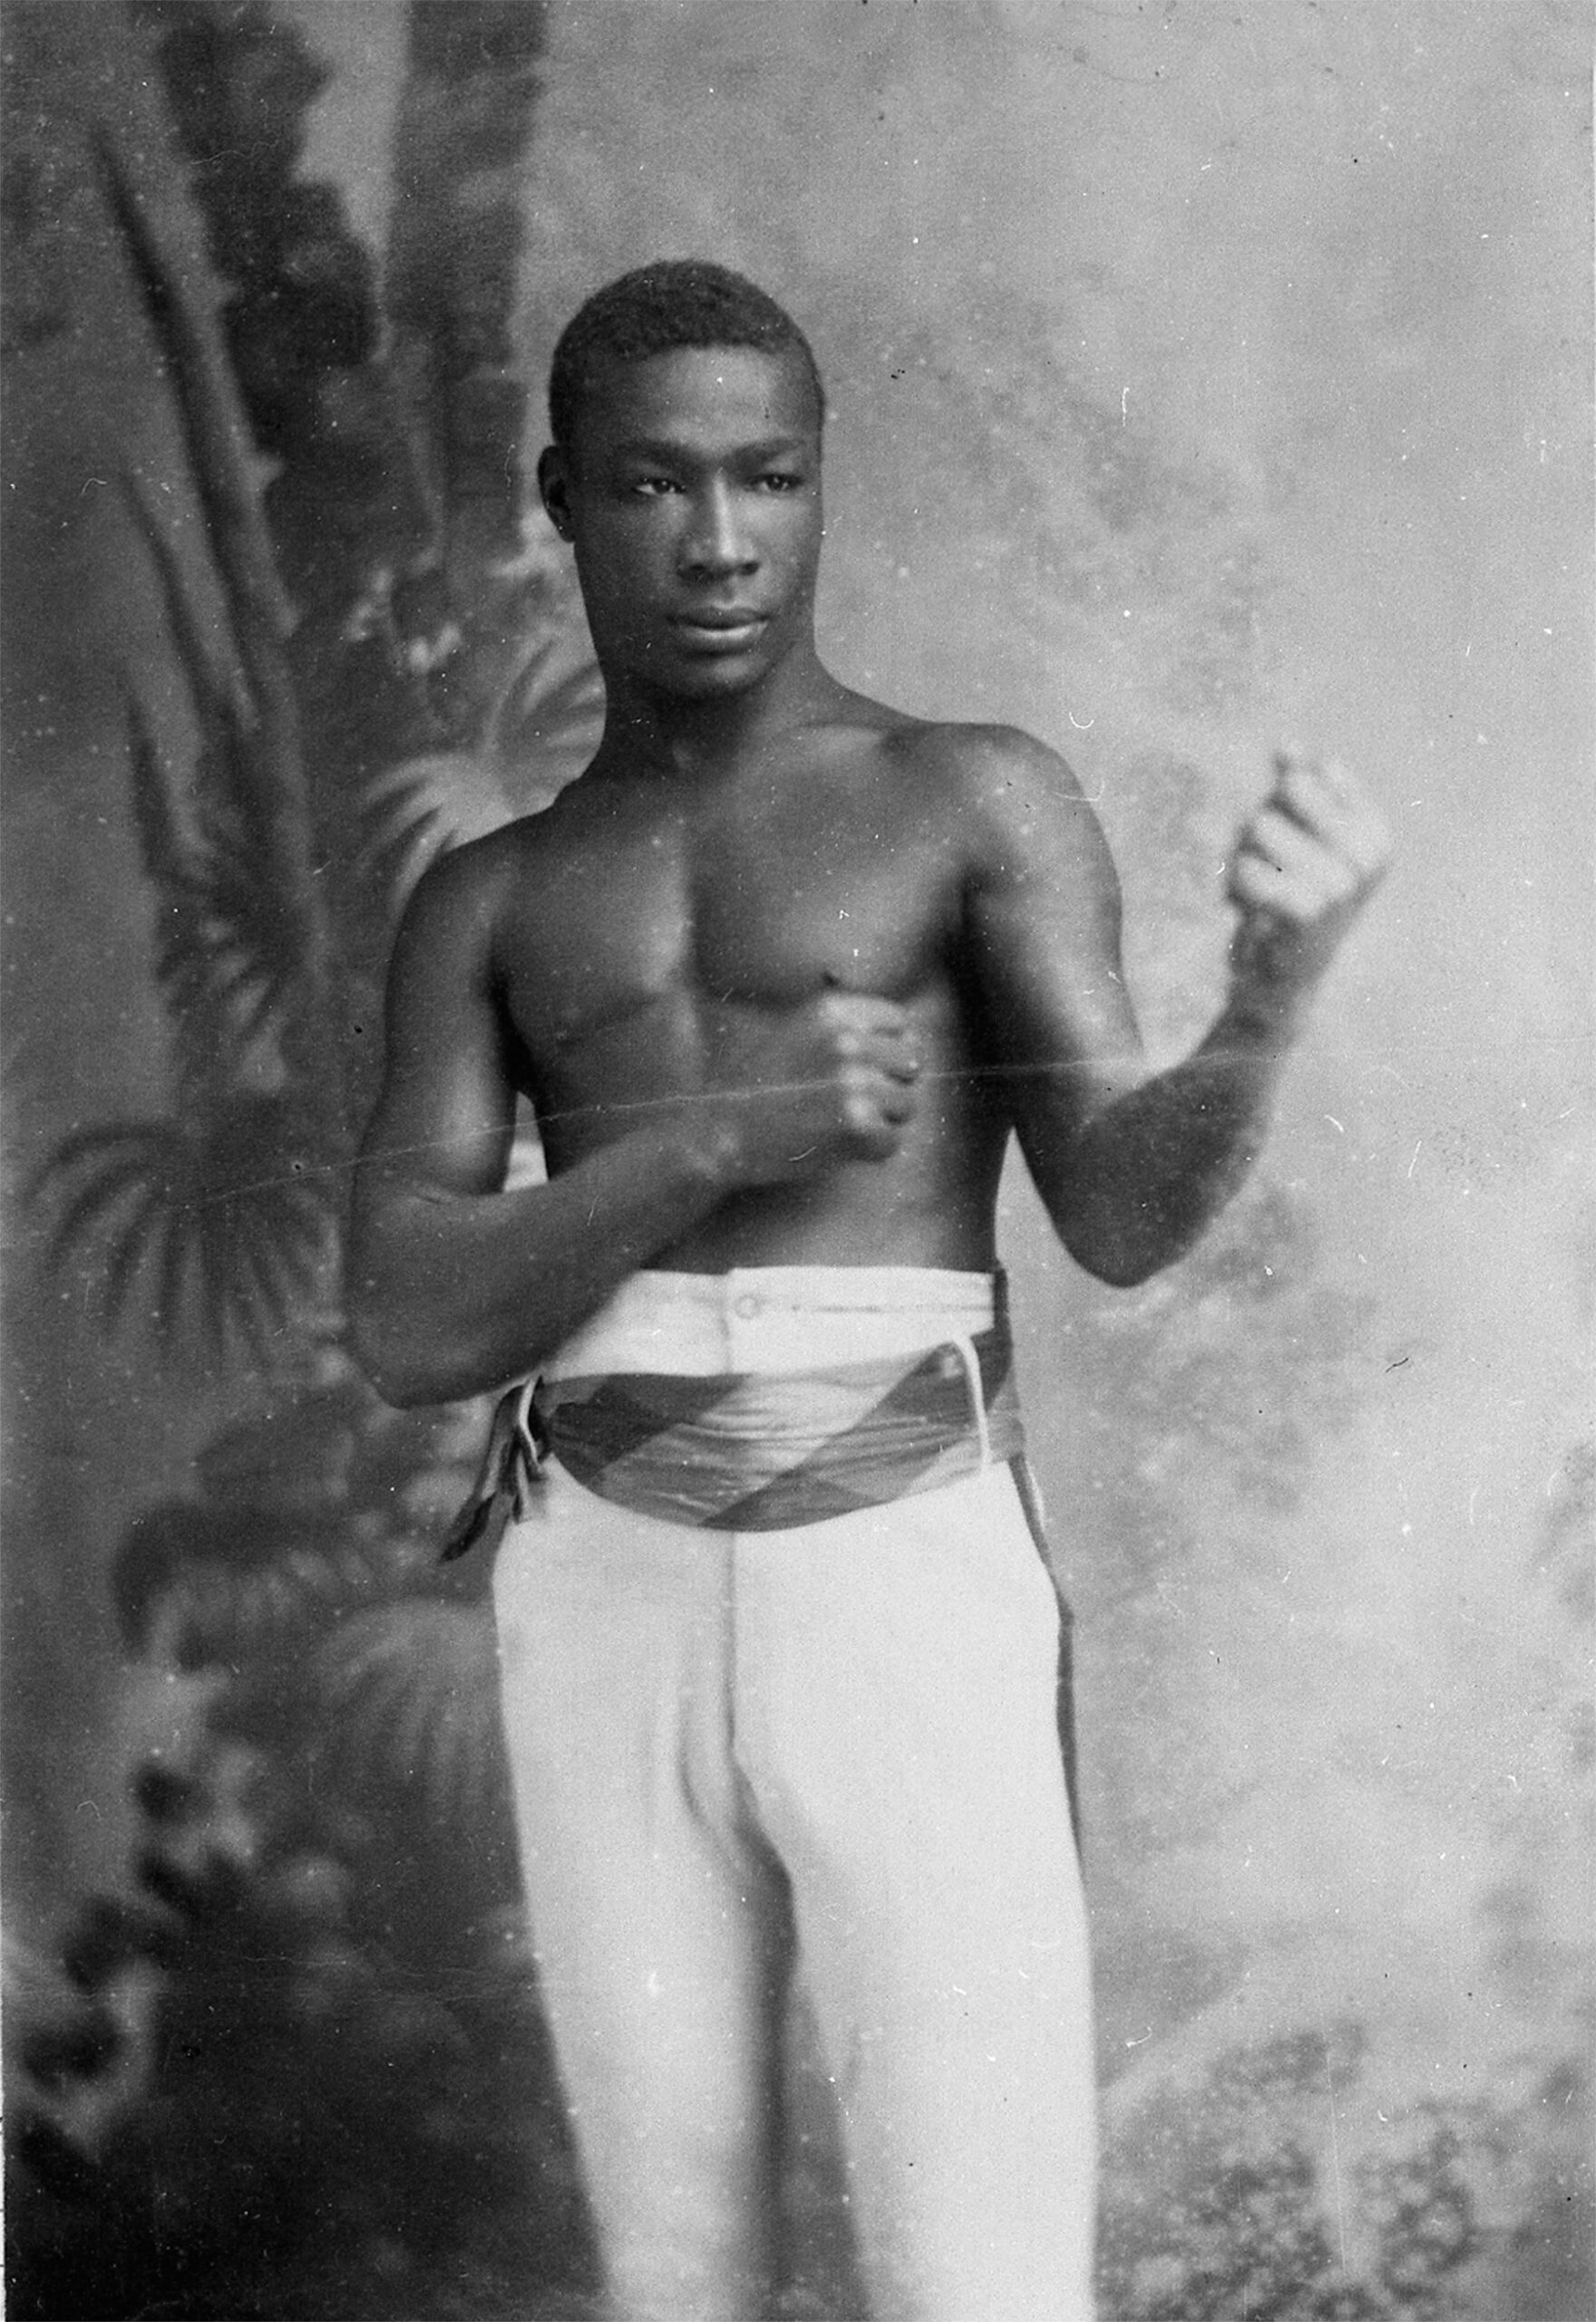 Monochrome photograph of a shirtless man wearing white trousers and holding his fists up in a boxing stance.